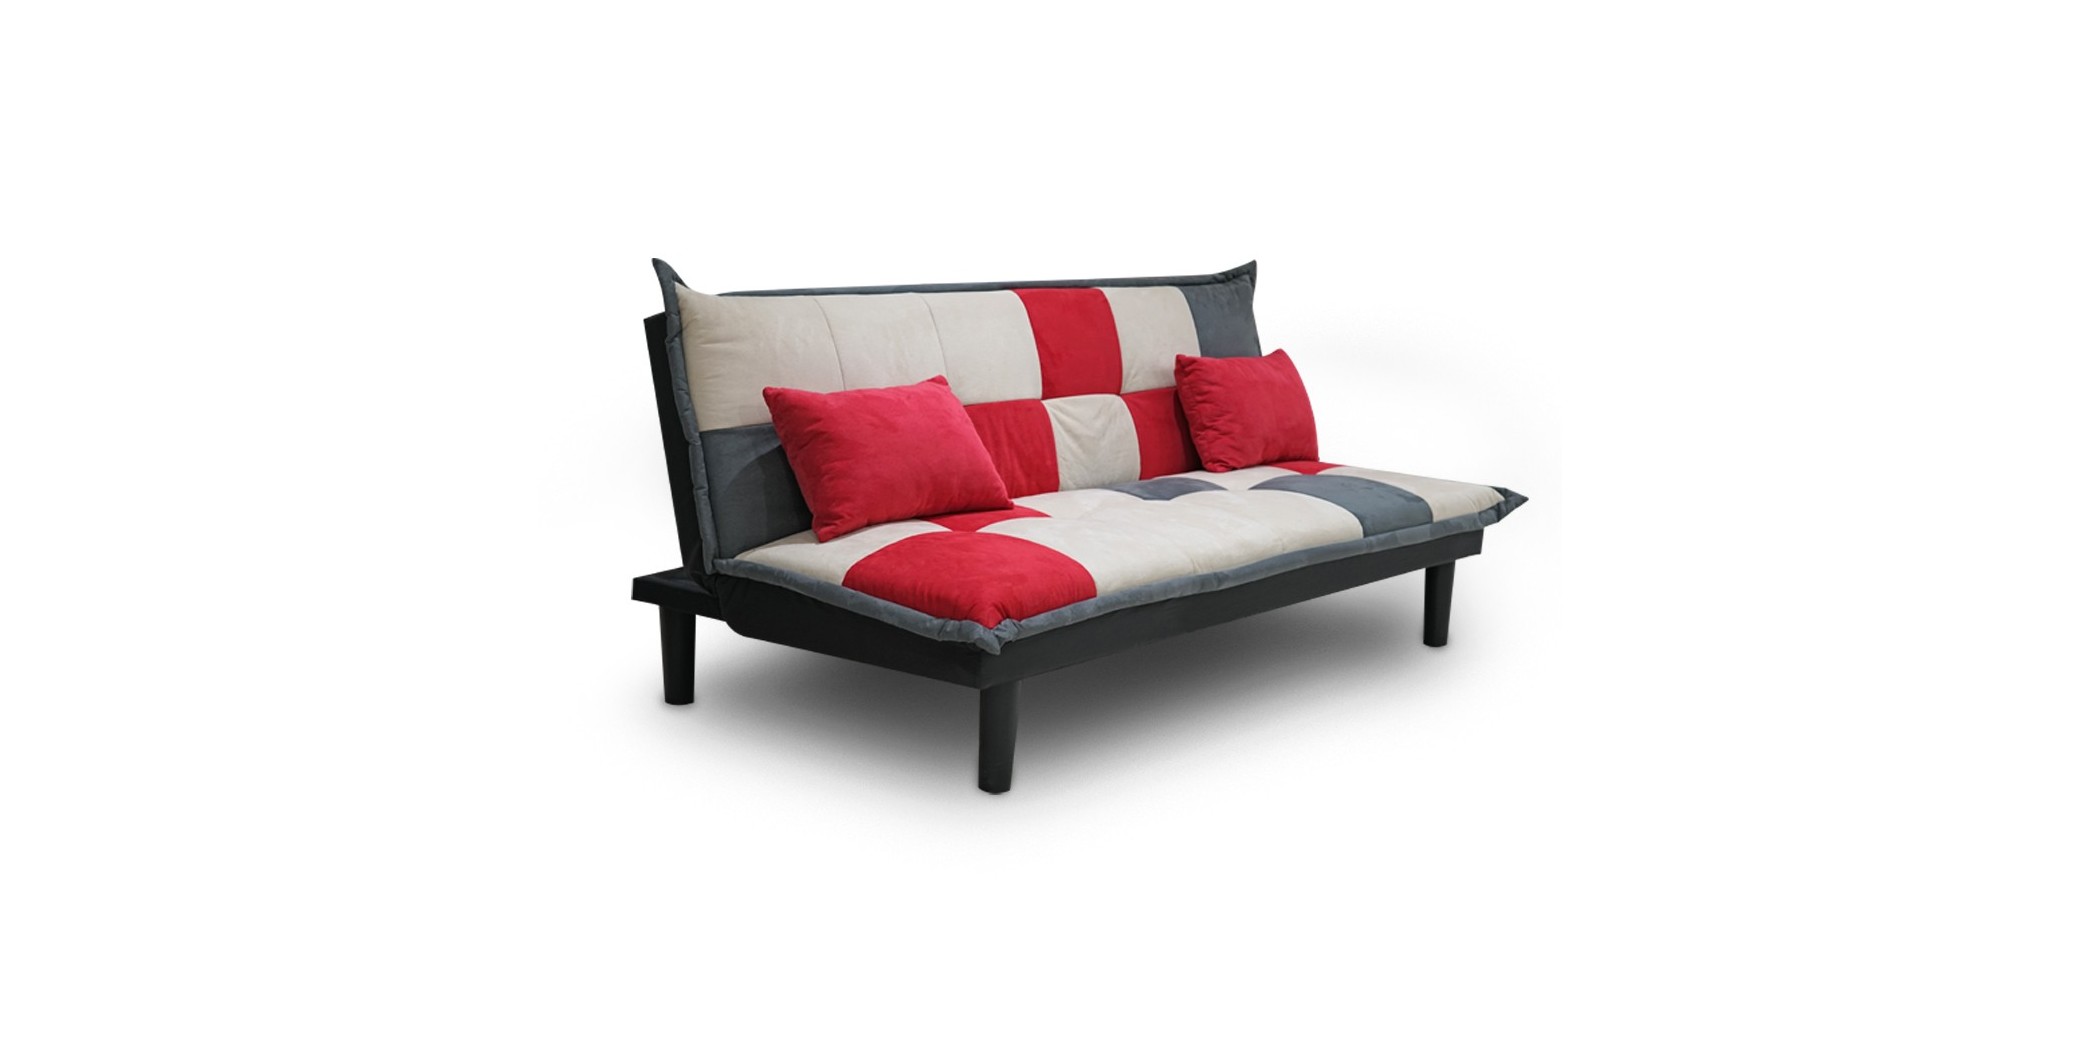 Christal Sofa Bed Red Fabric